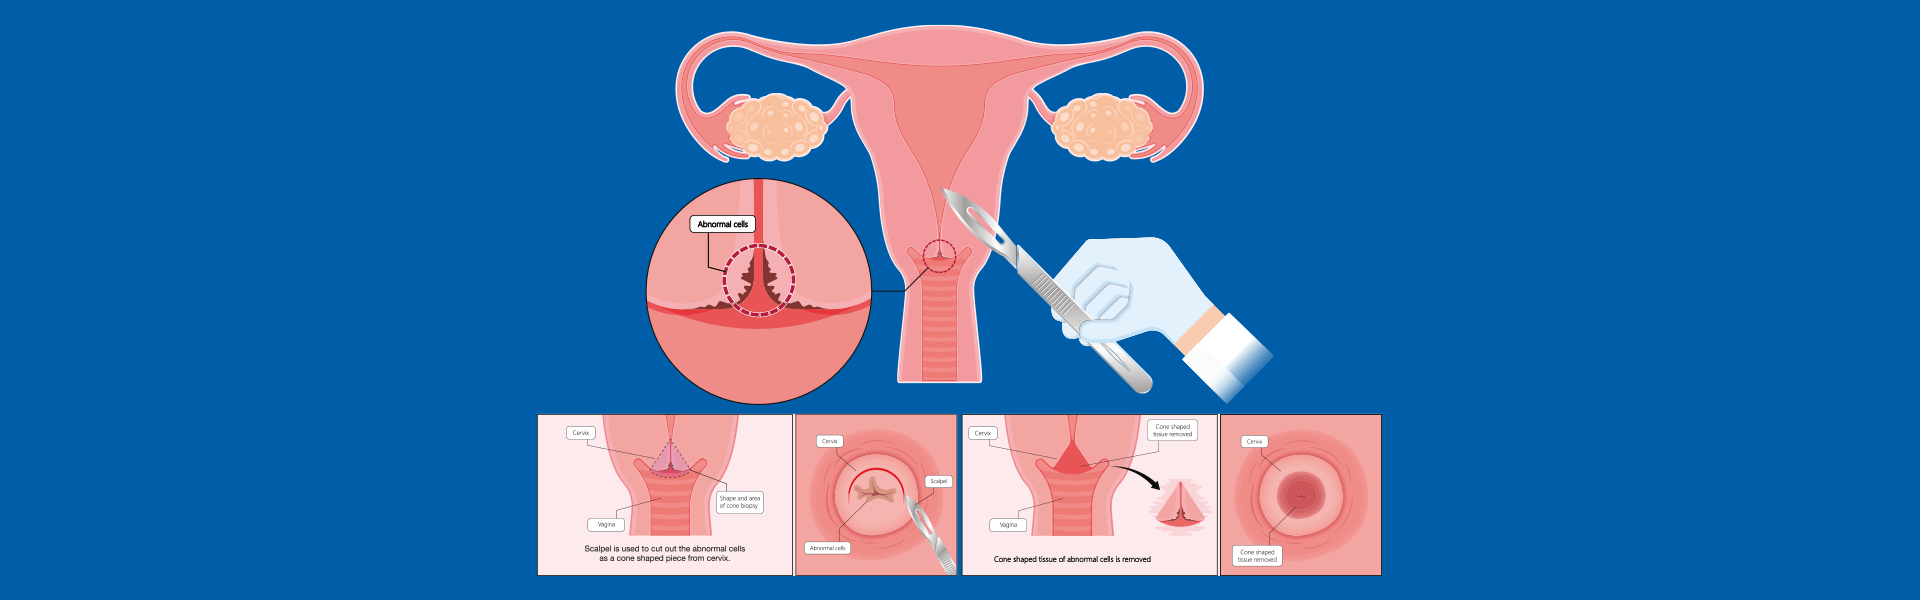 Pap Smear Test In Bangalore, India